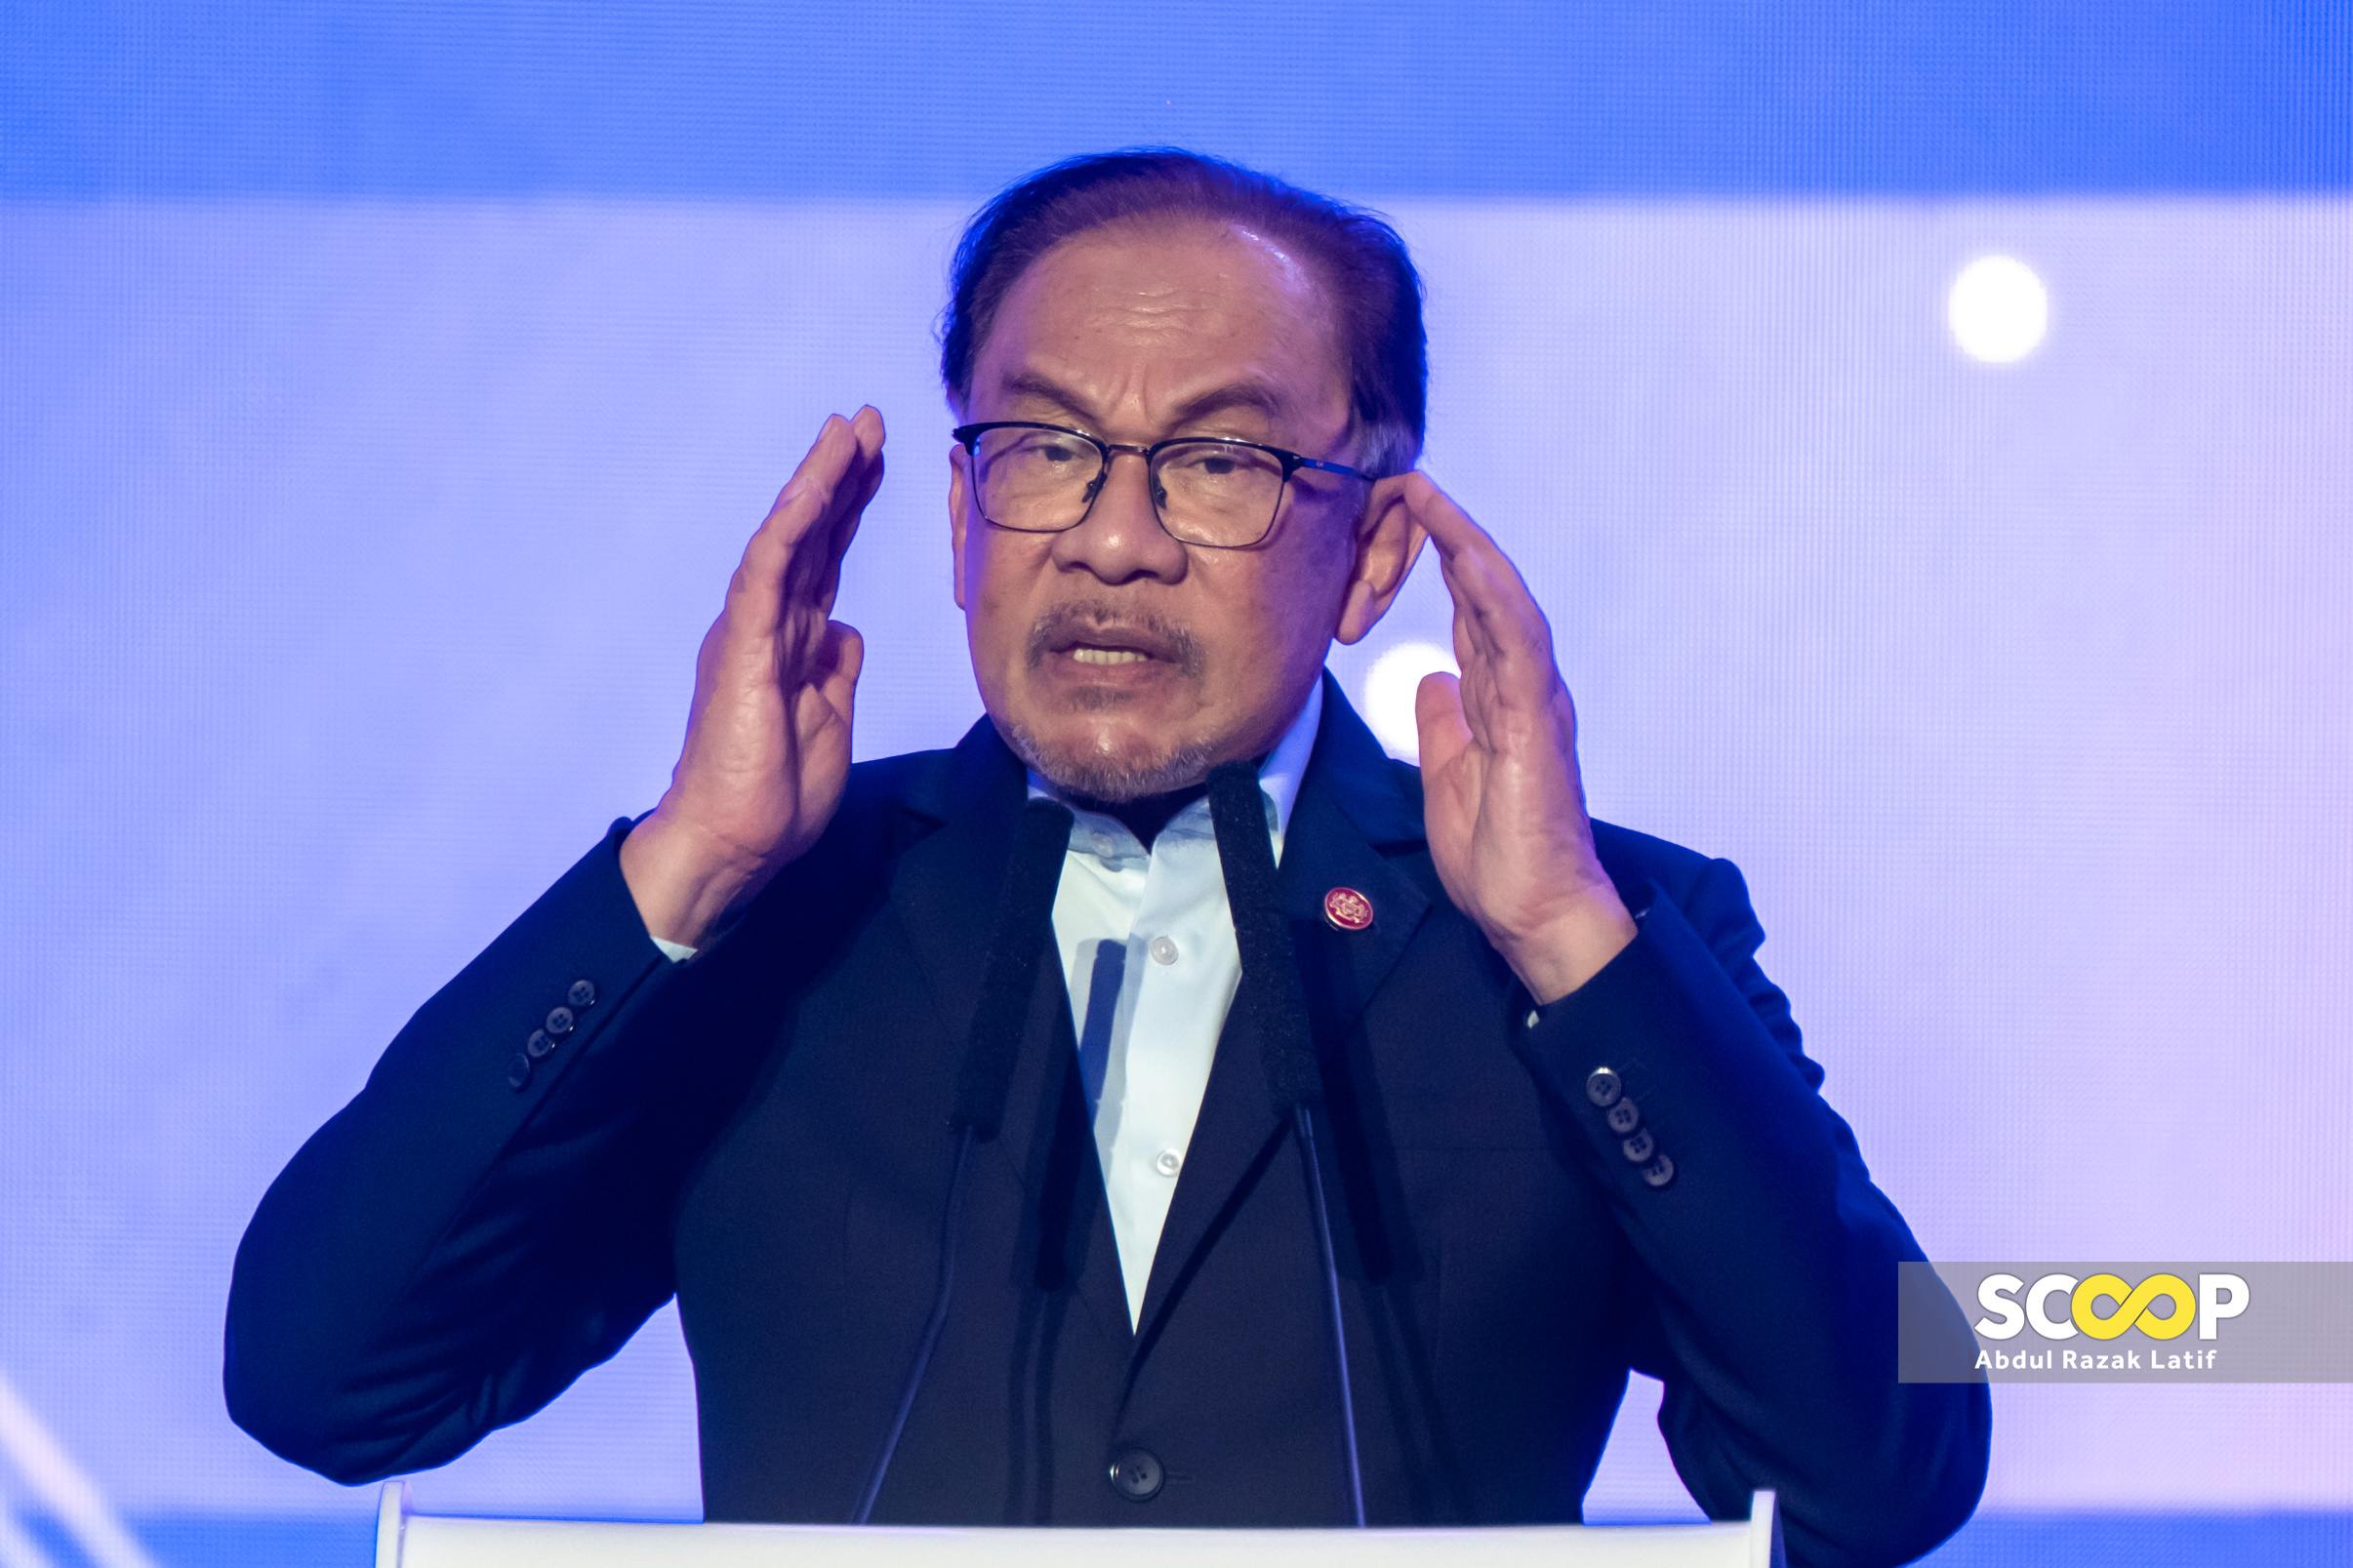 I used ‘ke***g’ to reference quote from old book, not to insult, Anwar clarifies